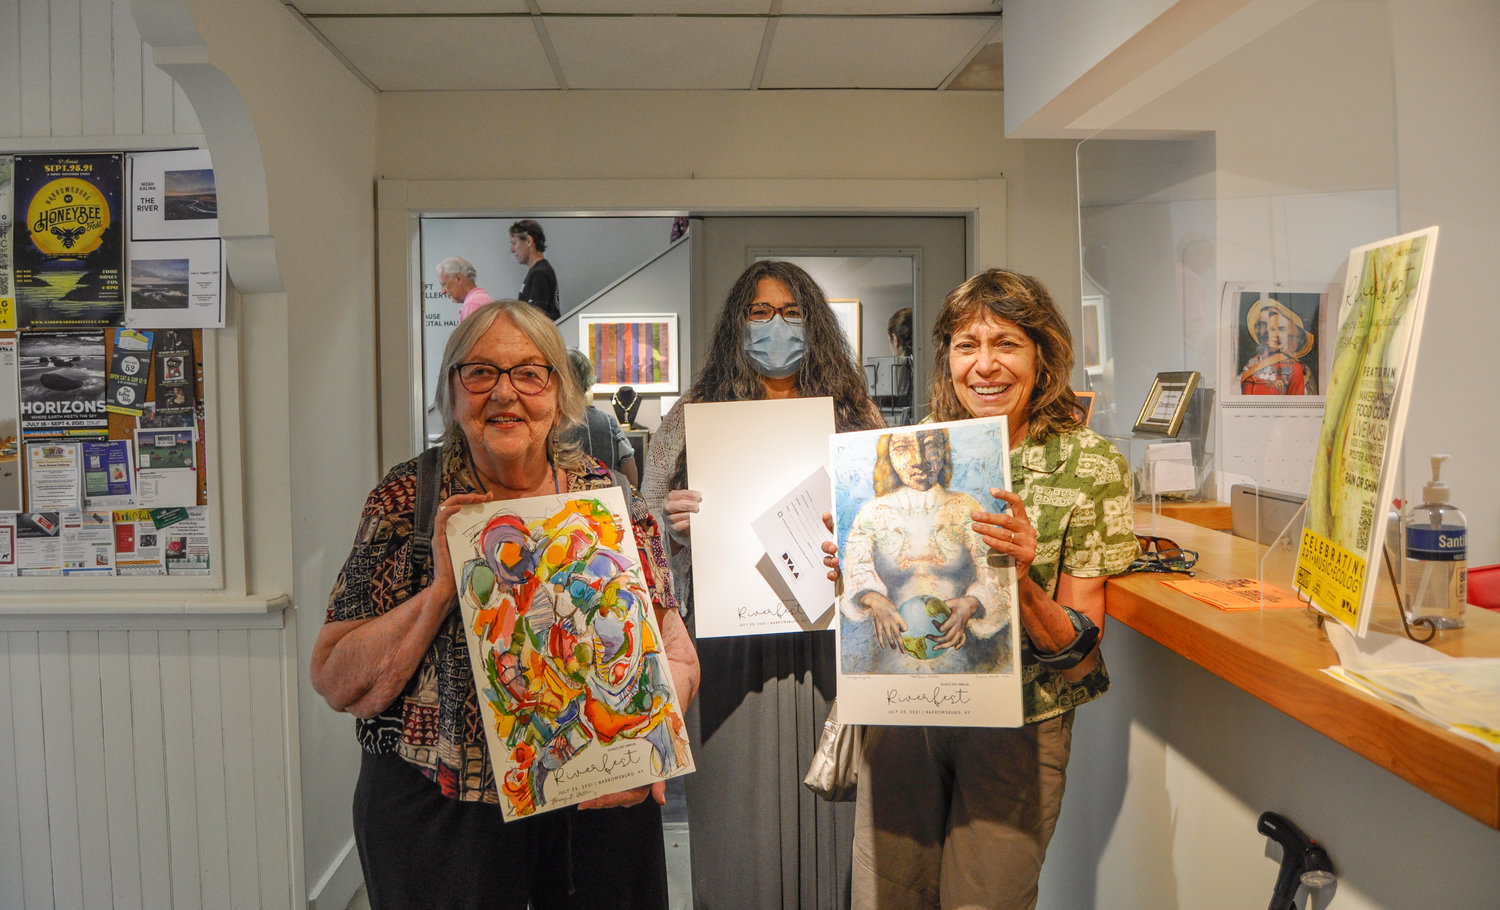 I ran into artists Nancy Wells, left, and Erica Hart at the Delaware Valley Arts Alliance in Narrowsburg, NY a few days ago, where they were dropping off their finished designs for Sunday’s Riverfest poster auction. As evidenced here, Tamara D’Agostino, center, still has a little way to go on hers.